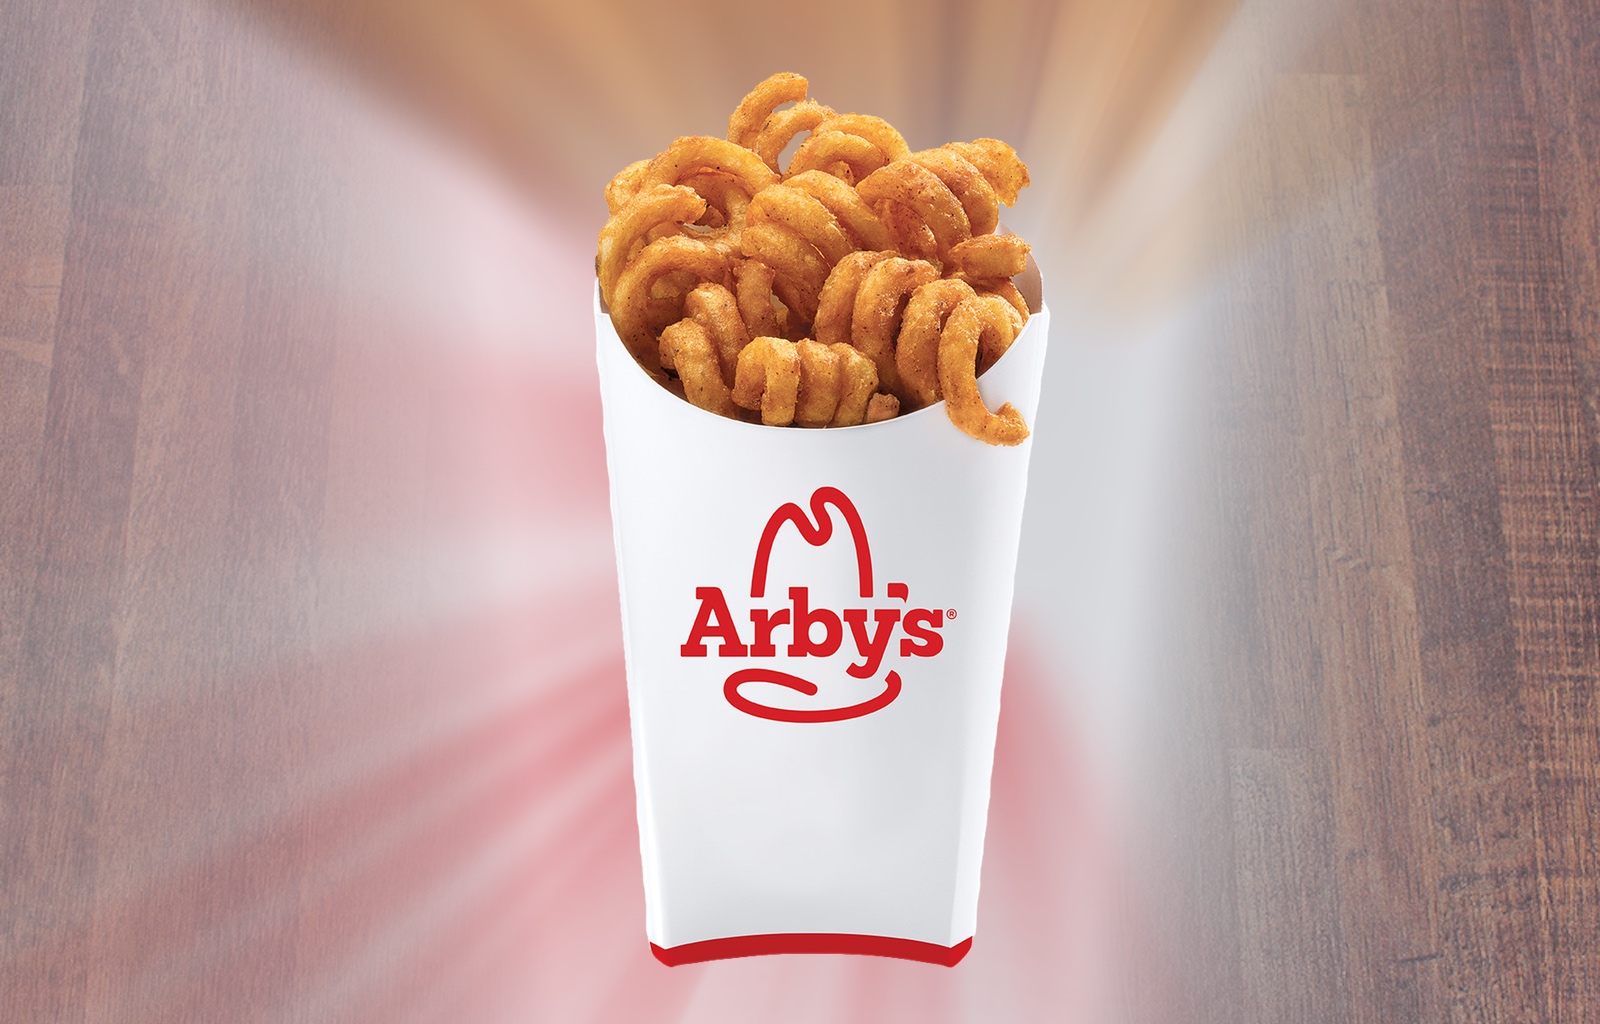 Arby's medium curly fries nutrition facts